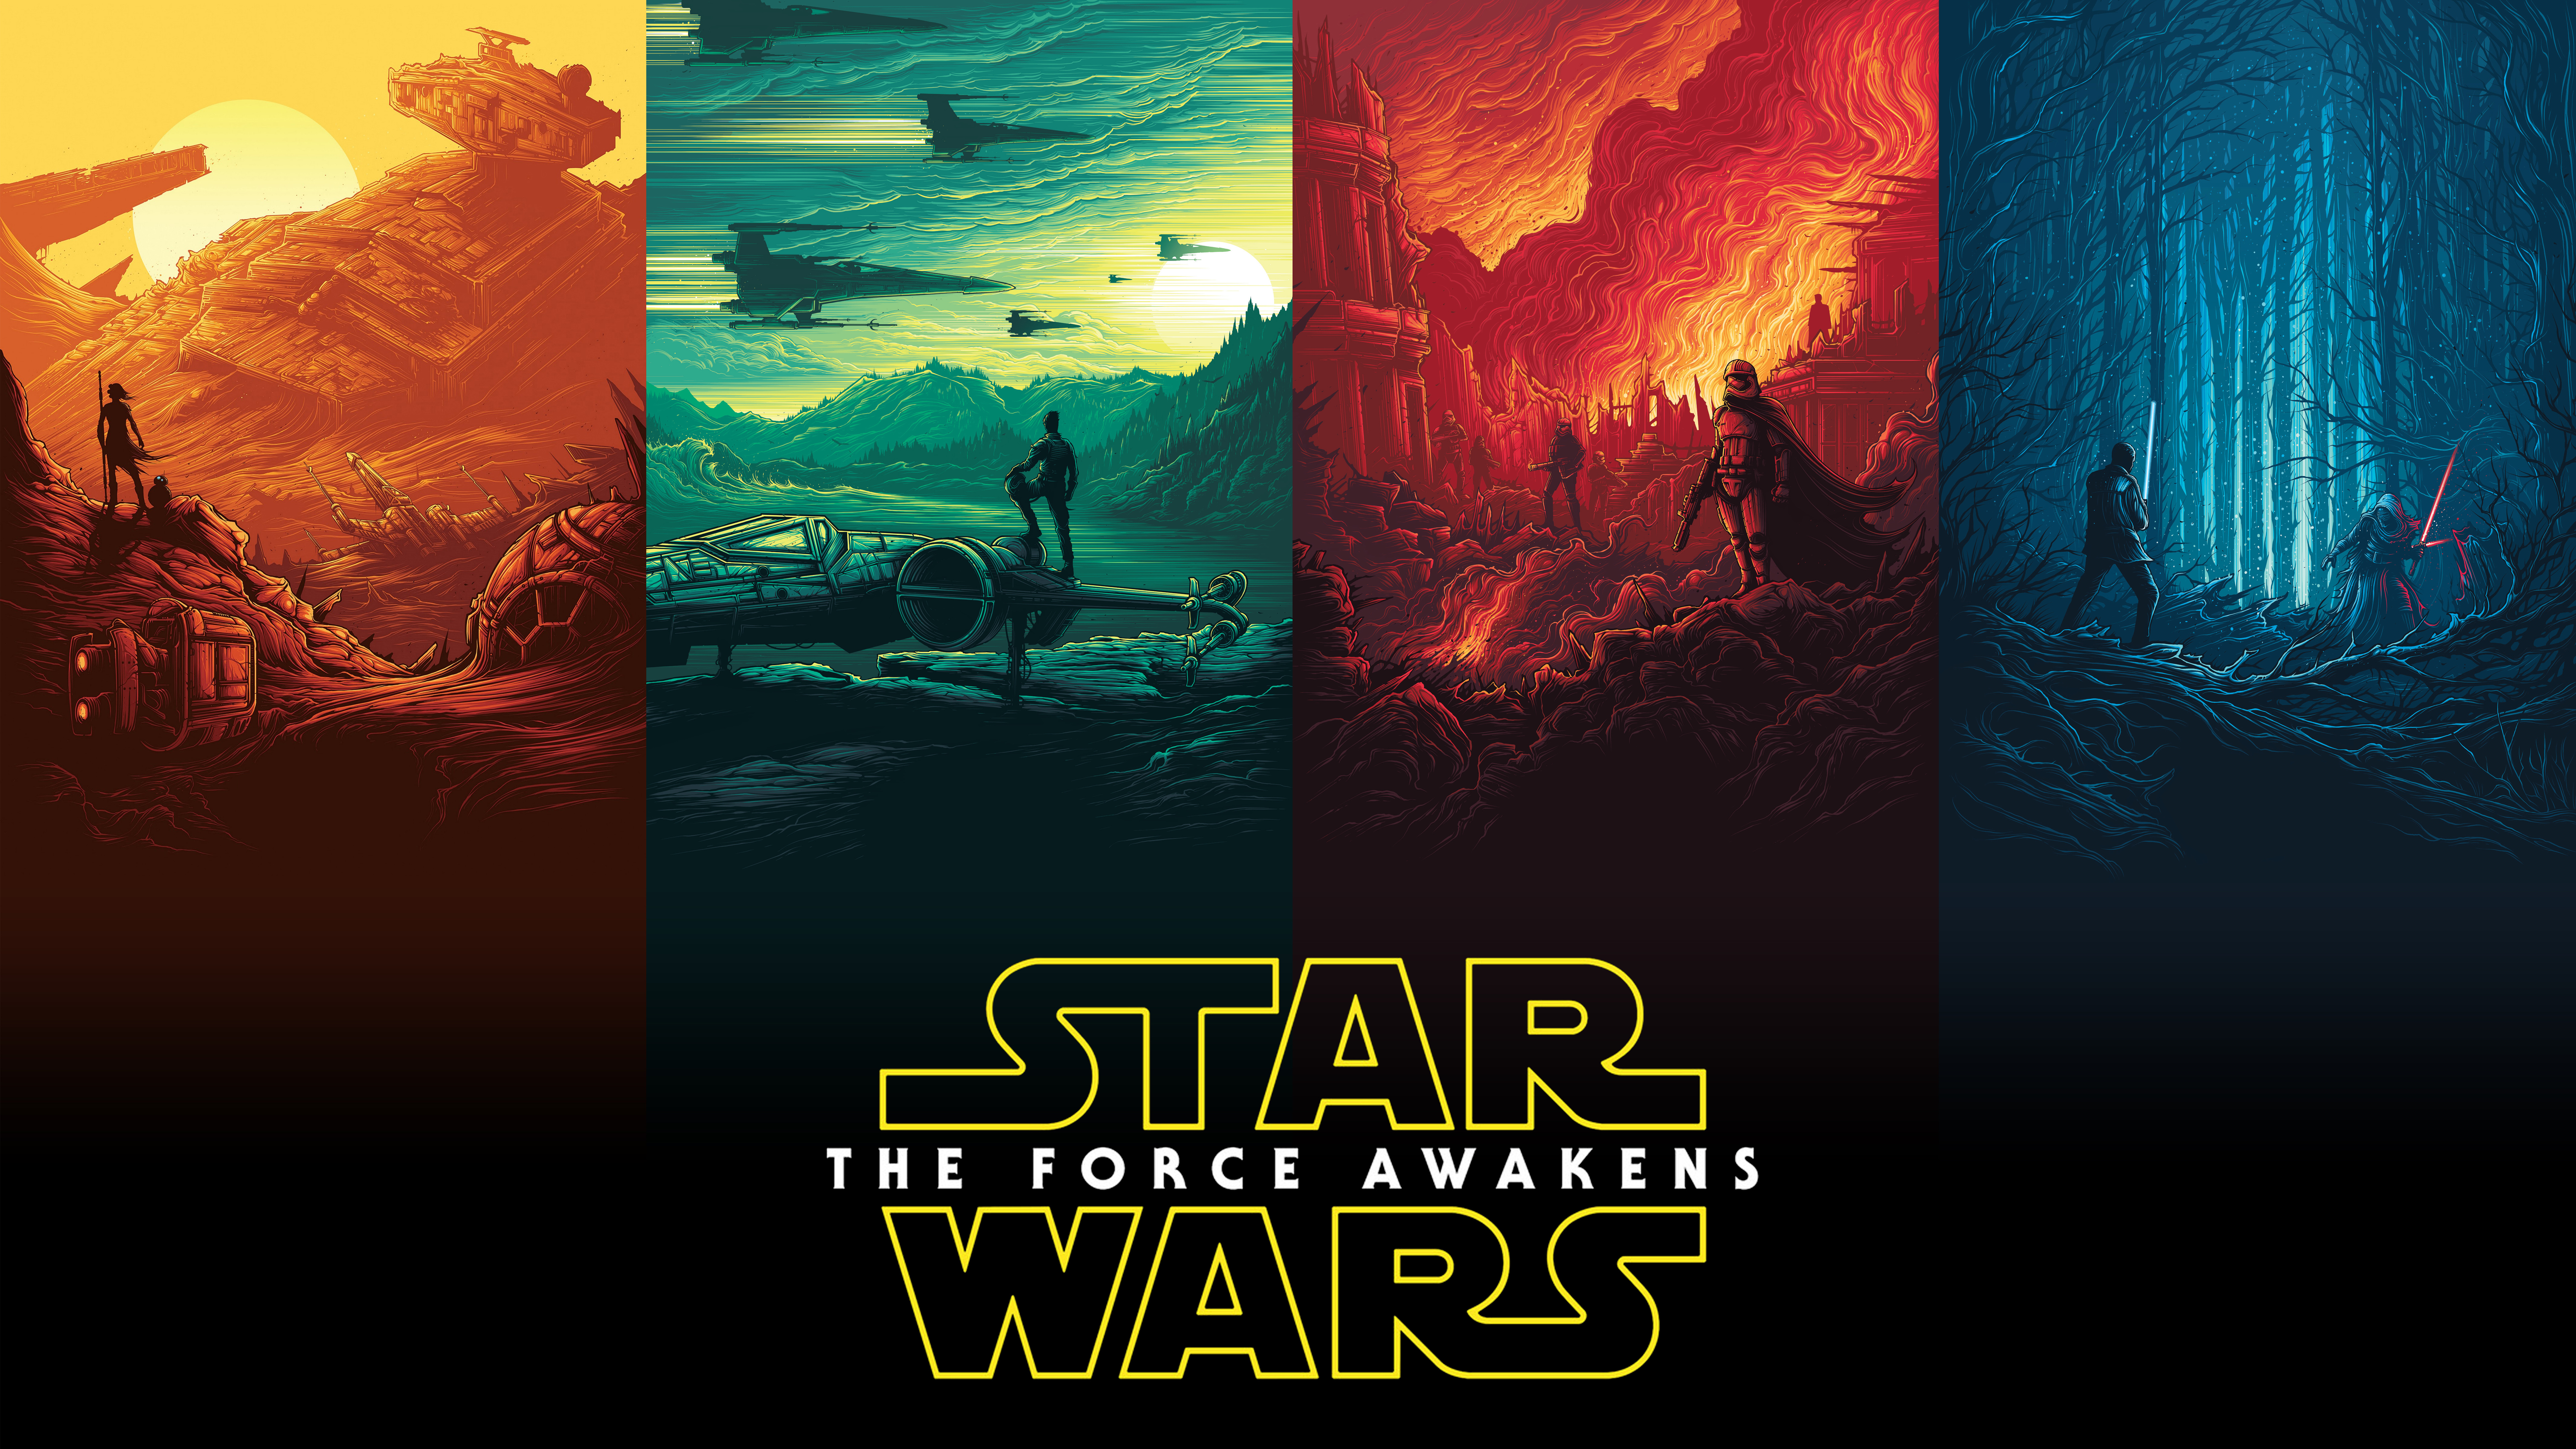 Star Wars, Star Wars: The Force Awakens, Movie poster, Film posters Wallpaper